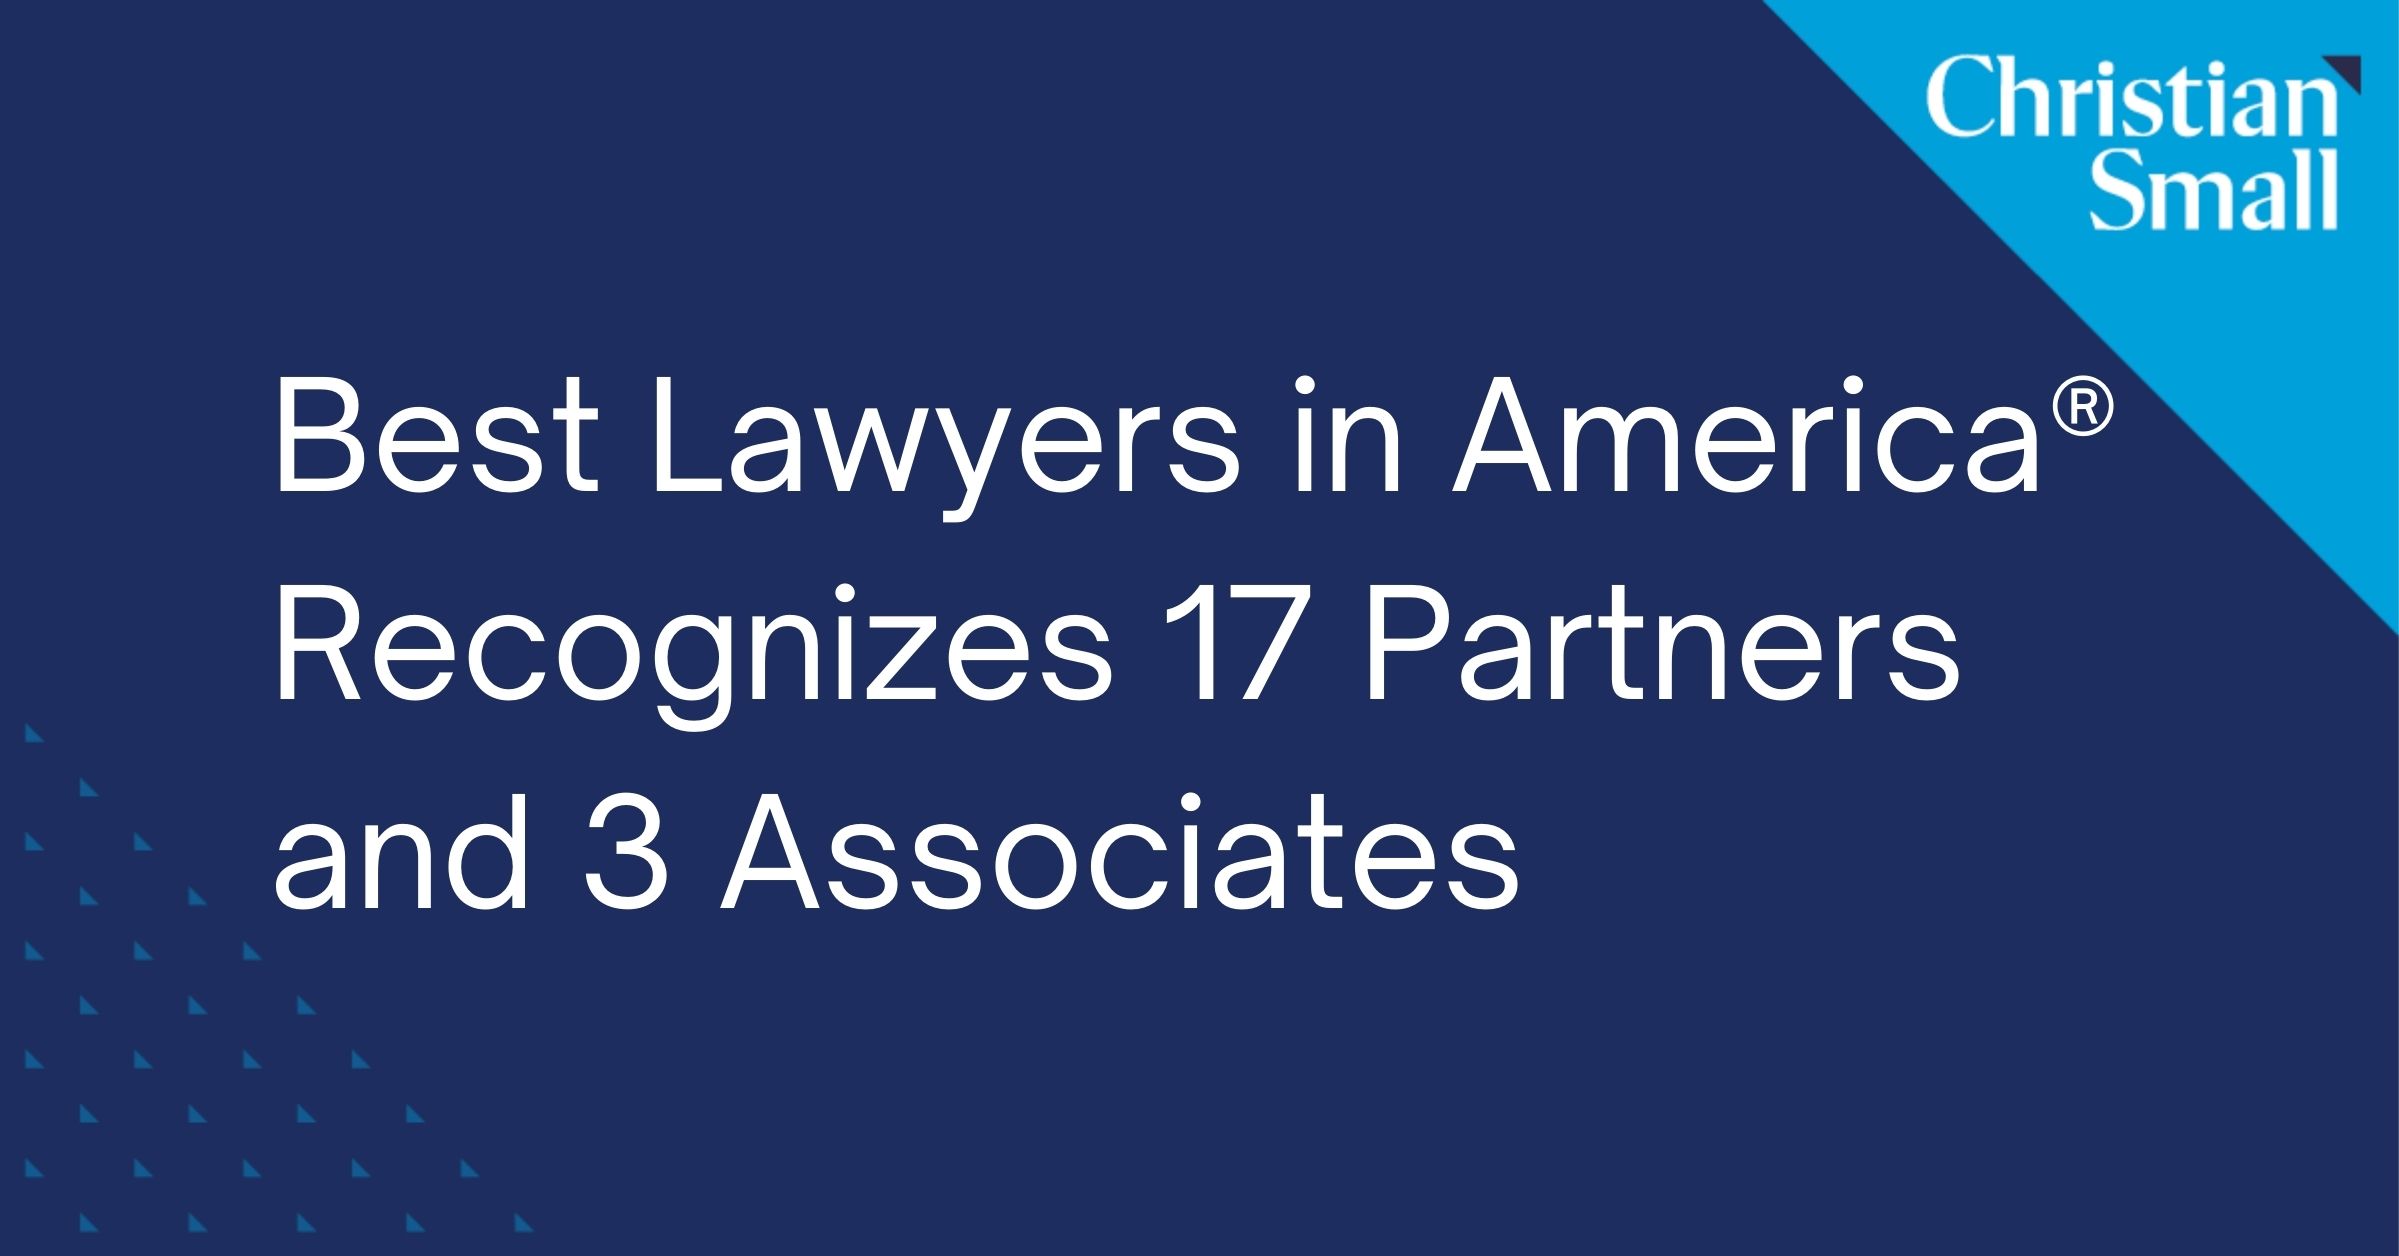 2022 Best Lawyers in America® Recognizes 17 Partners and 3 Associates